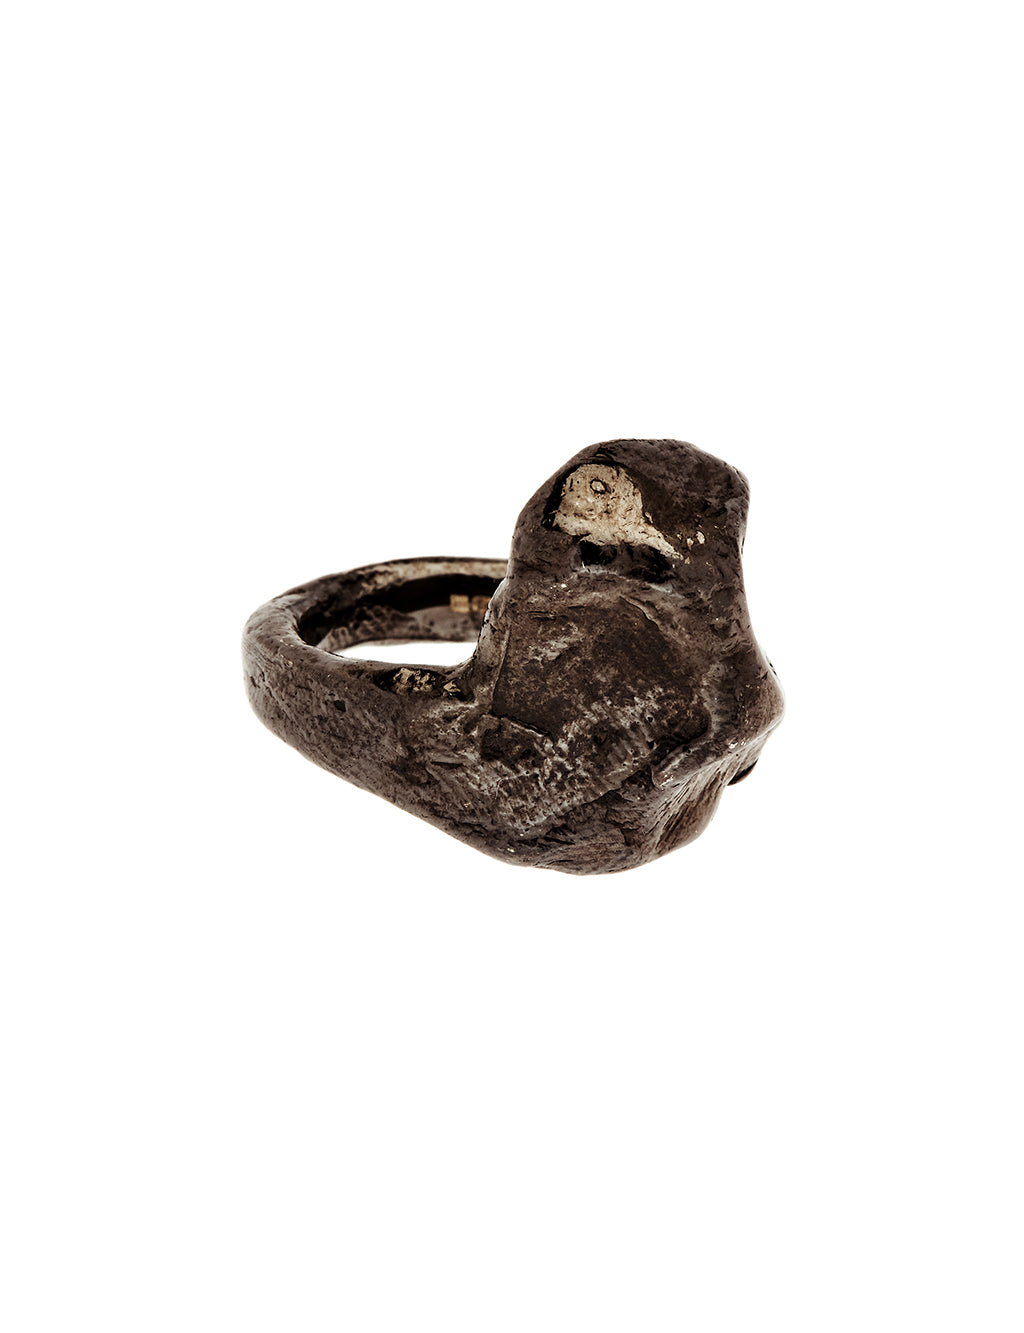 Black rhodium textured ring with primitive shape of face